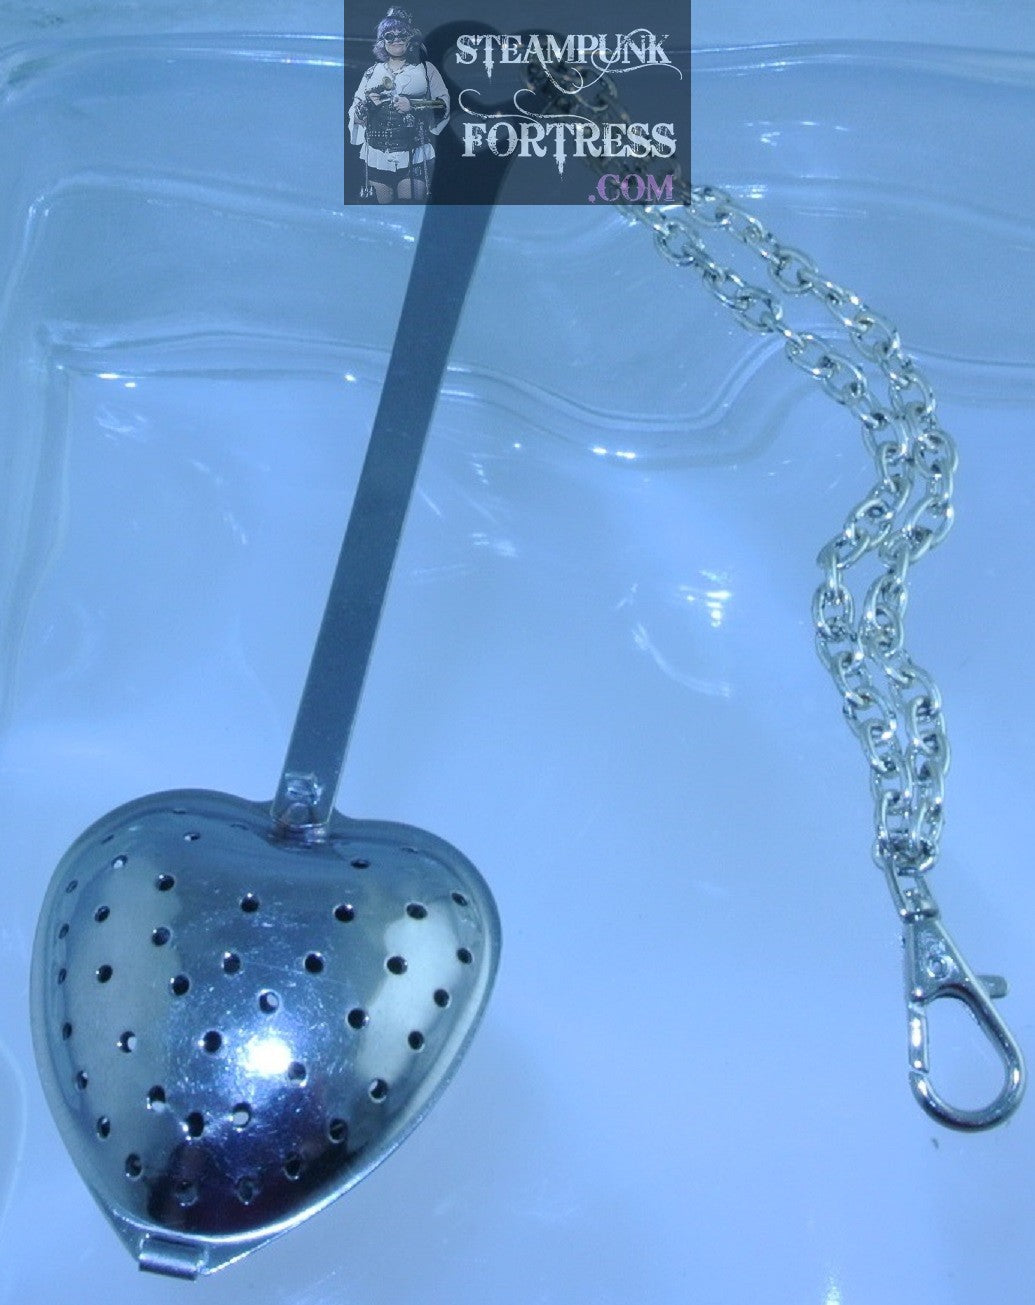 SILVER STRAINER SPOON STIRRER INFUSER HEART SHAPE TEA DUELING HEAVY CHAIN CLASP CLIP STARR WILDE STEAMPUNK FORTRESS